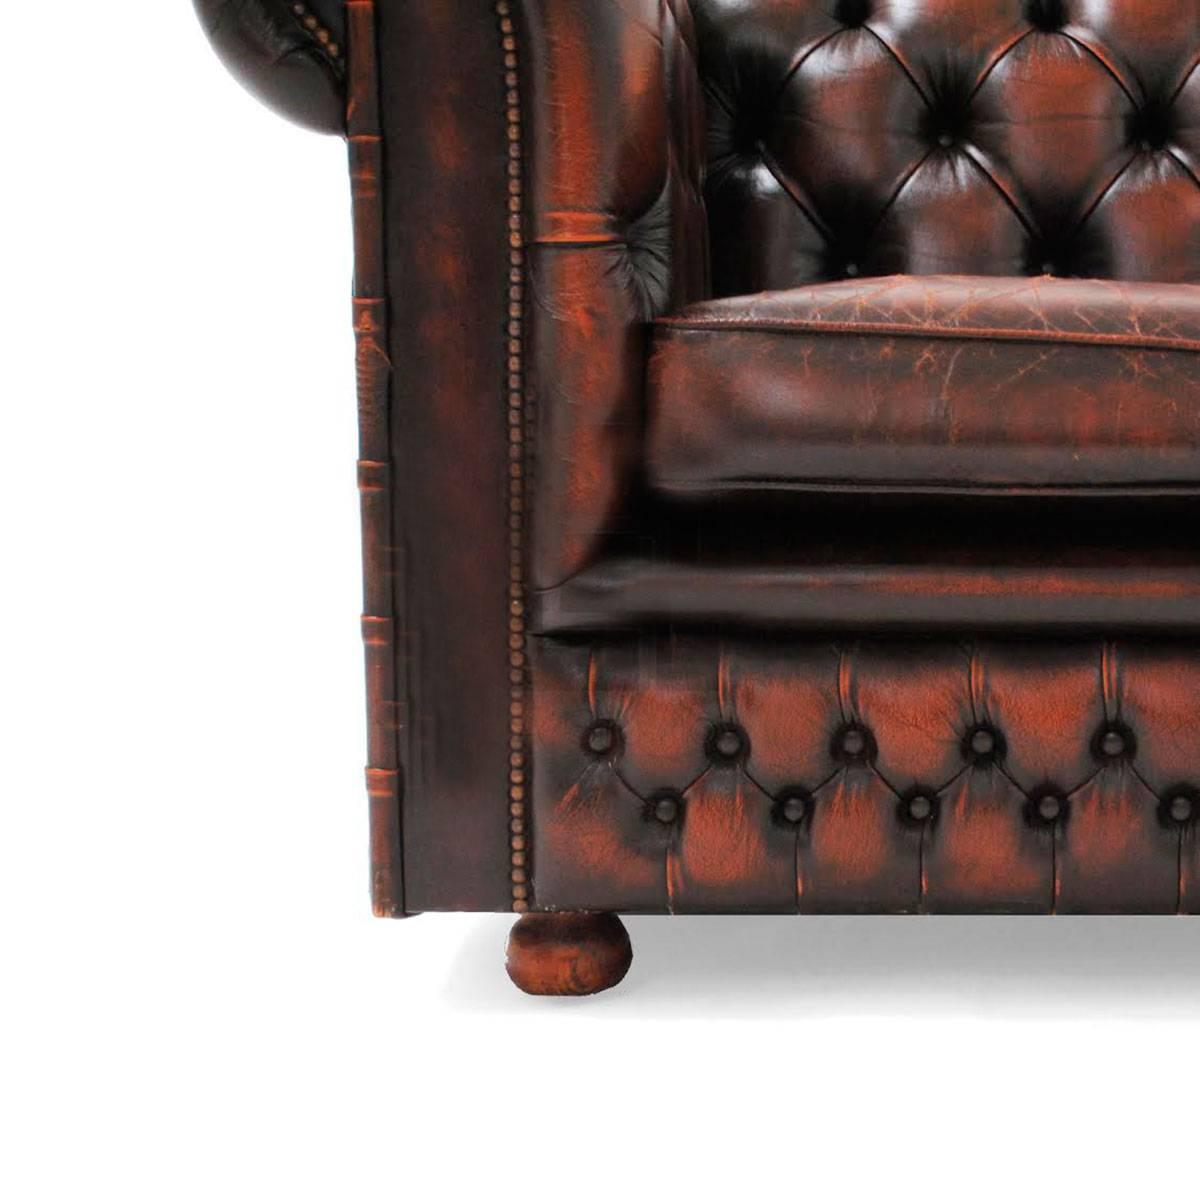 Four-seat chesterfield sofa with the original leather.